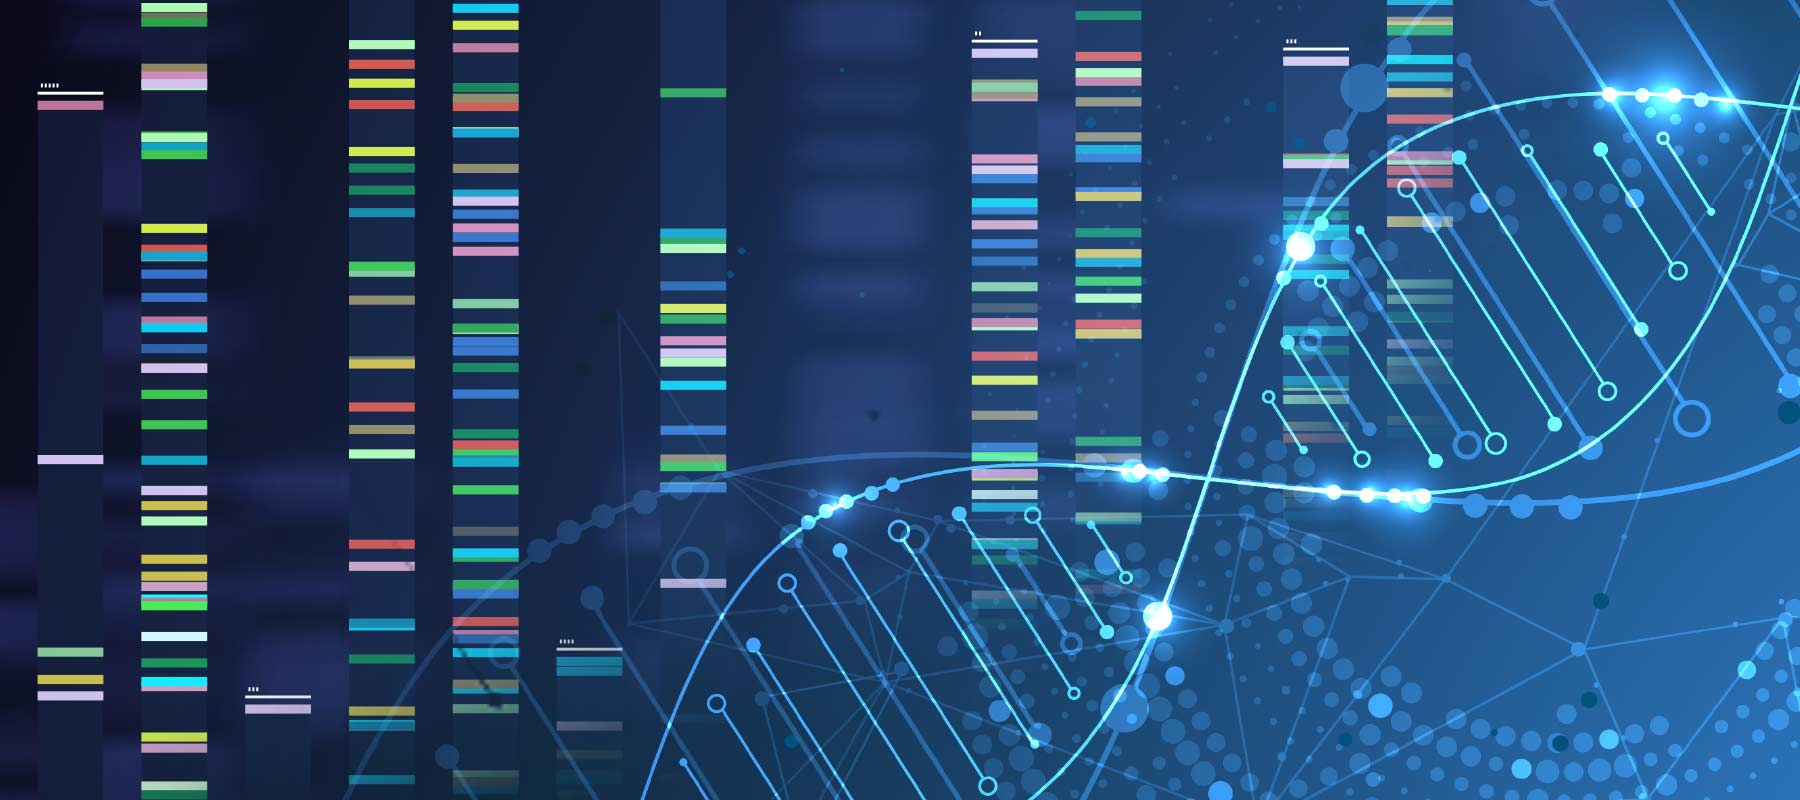 Next-Generation Sequencing (NGS) Market Size, Share, Growth, Industry Trends and Forecast Analysis 2022-2027